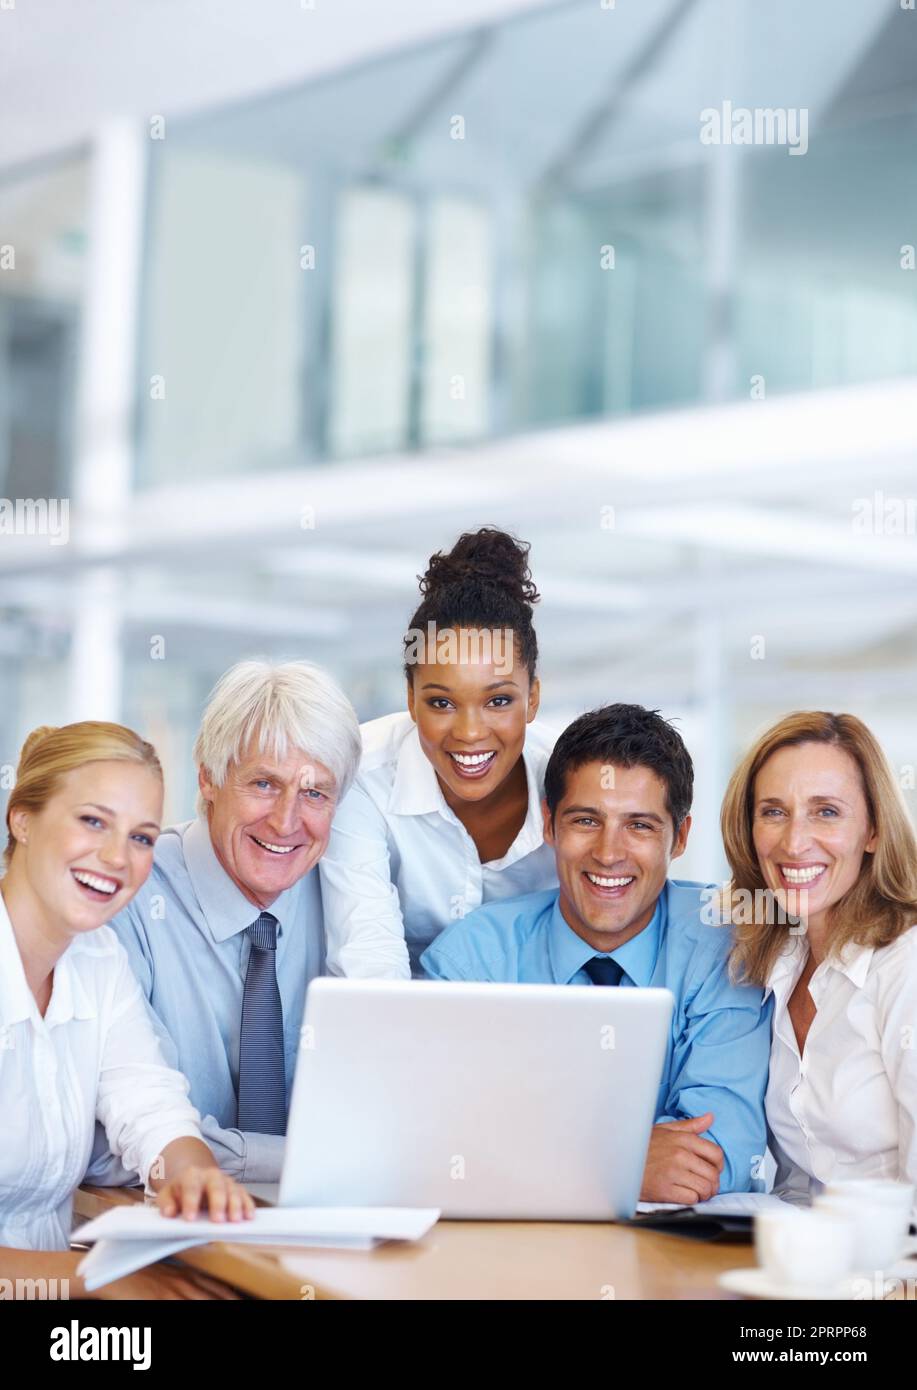 Working together. Portrait of successful multi ethnic business people working together on laptop. Stock Photo